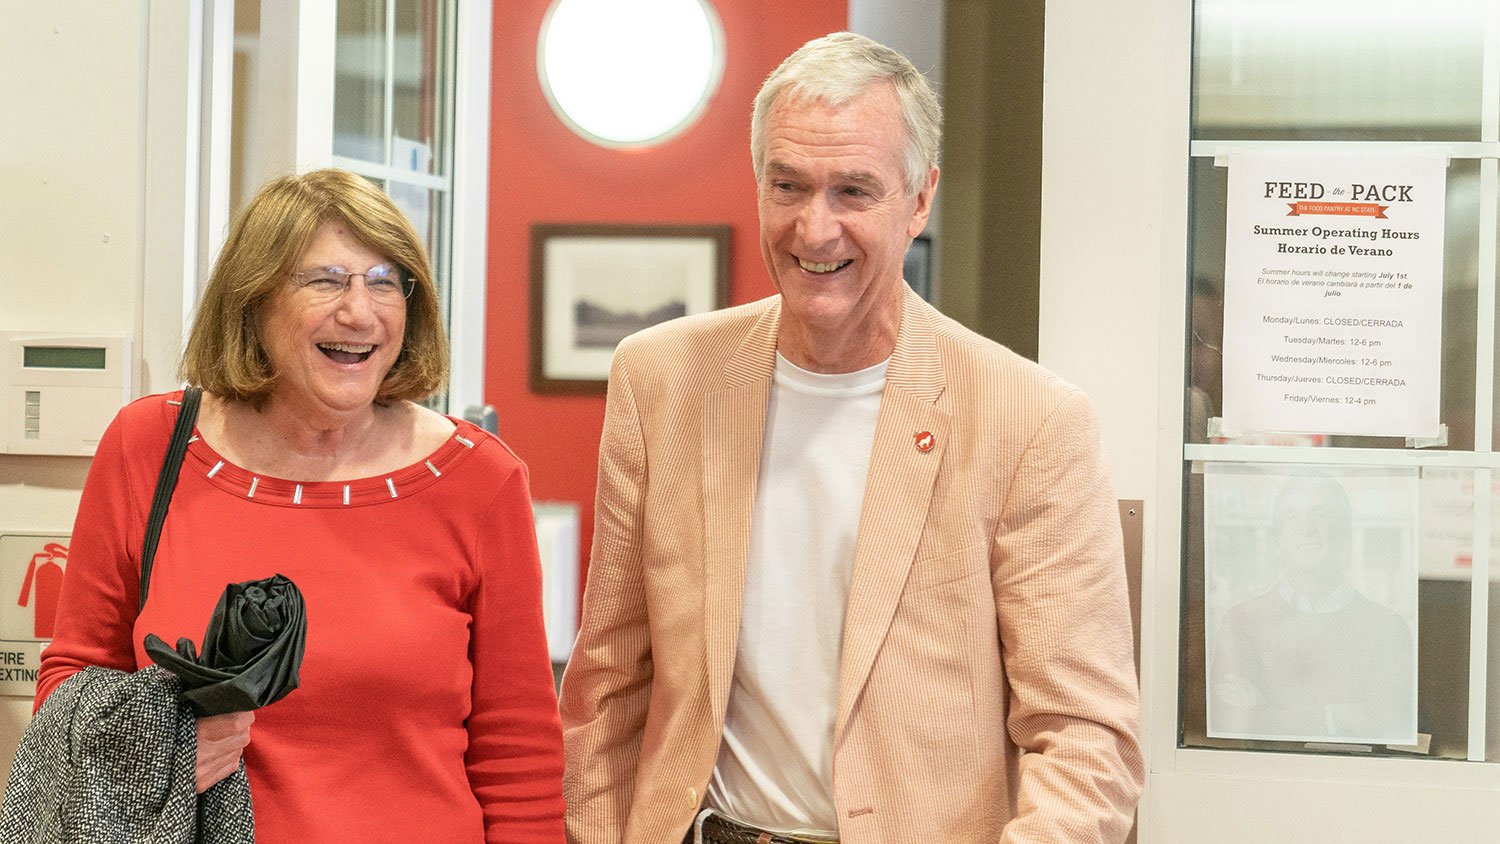 Dean Jeff Braden and his wife, Jill, walk into NC State's Feed the Pack Pantry on June 25